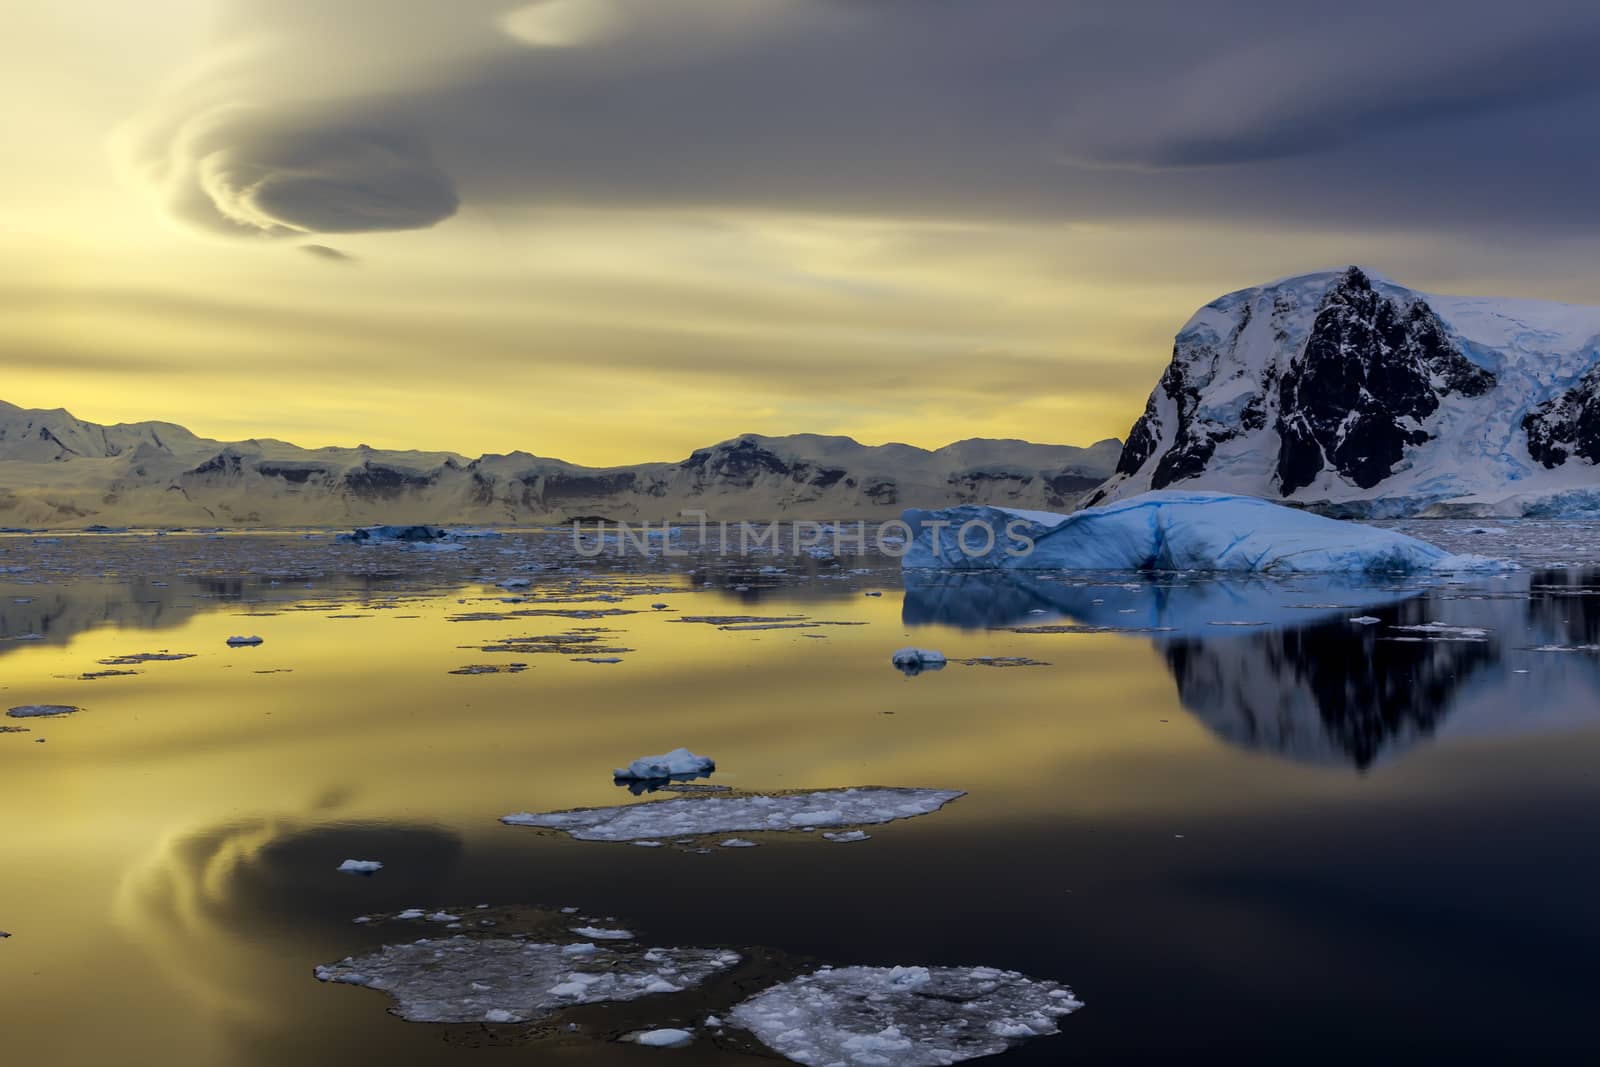 Blue iceberg, mountains and sunset reflecting in ocean at Lemaire Strait, Antarctica